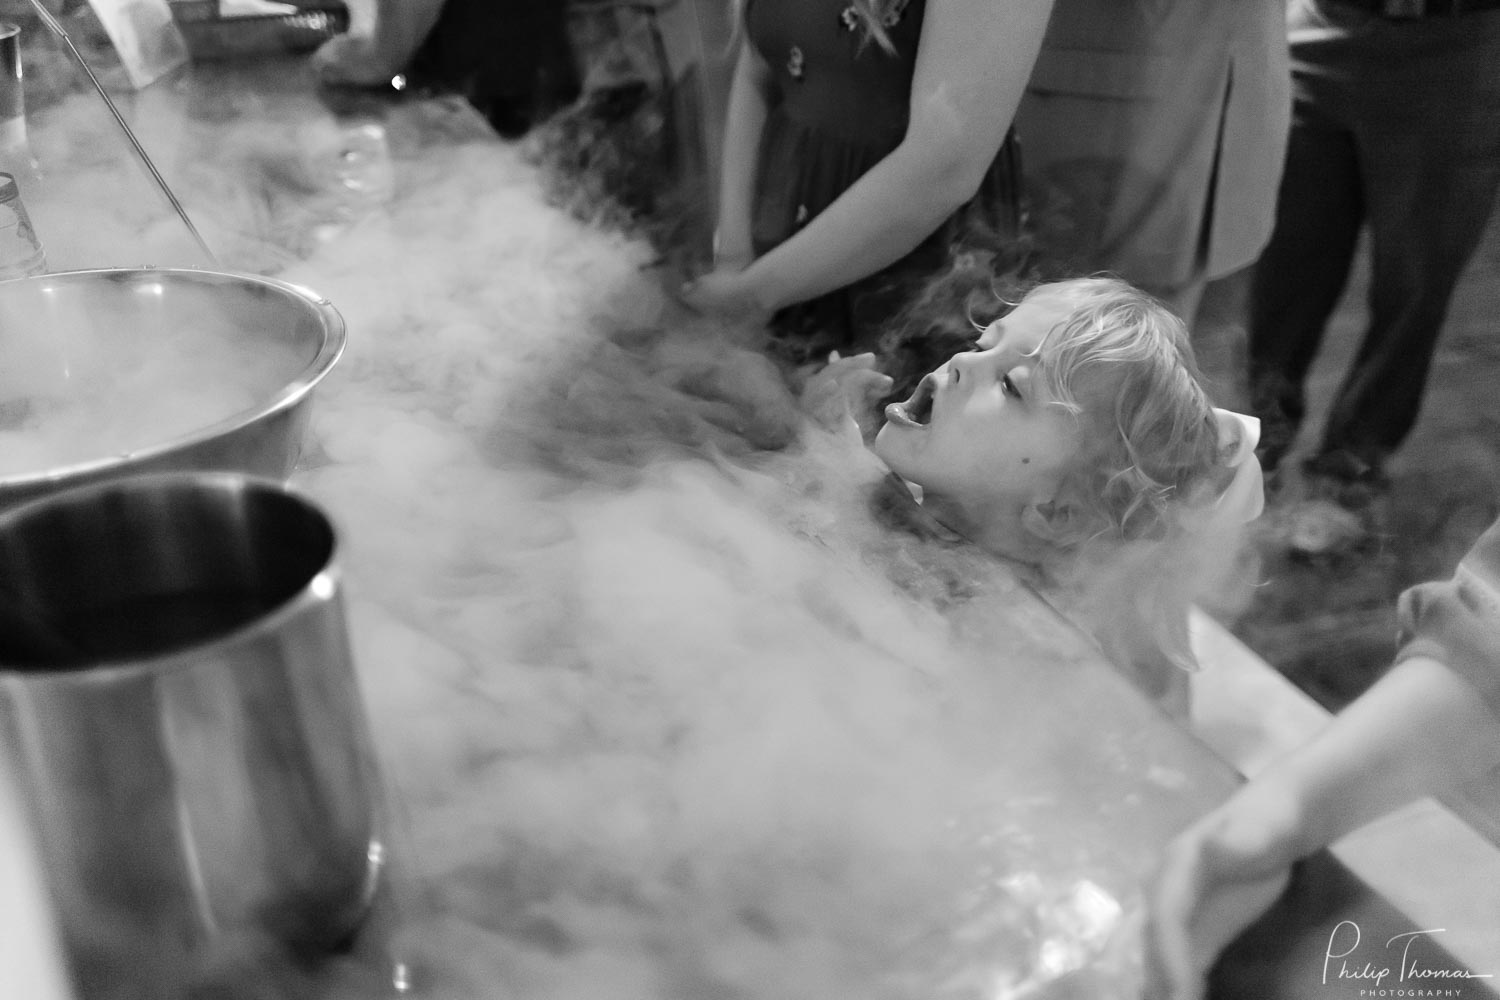 My favorite wedding images of 2019 shows a small girl playing with smoked ice at a dessert station